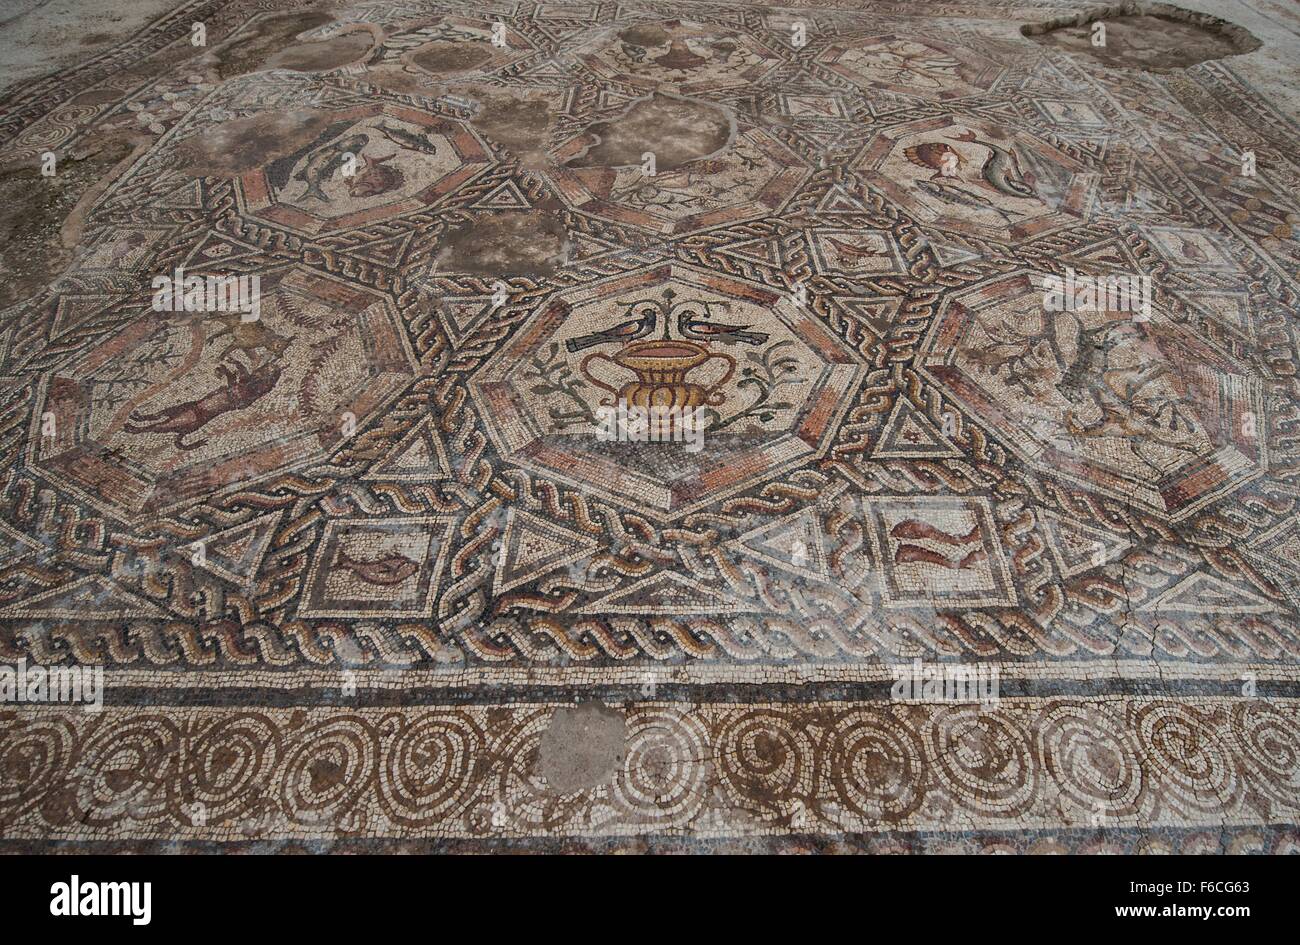 (151116) -- LOD (ISRAEL), Nov. 16, 2015 (Xinhua) -- Part of a 1,700-year-old mosaic is seen in Lod, a city east of Tel Aviv in central Israel, on Nov. 16, 2015. Israel's Antiquities Authority unveiled Monday a Roman-era floor mosaic, which was unearthed last year during constructions of a visitor center meant to exhibit another mosaic discovered two decades ago in the same place. Archaeologists said that the 'breathtaking' mosaic served as a floor of a villa's living room some 1,700 years ago. (Xinhua/Li Rui) Stock Photo